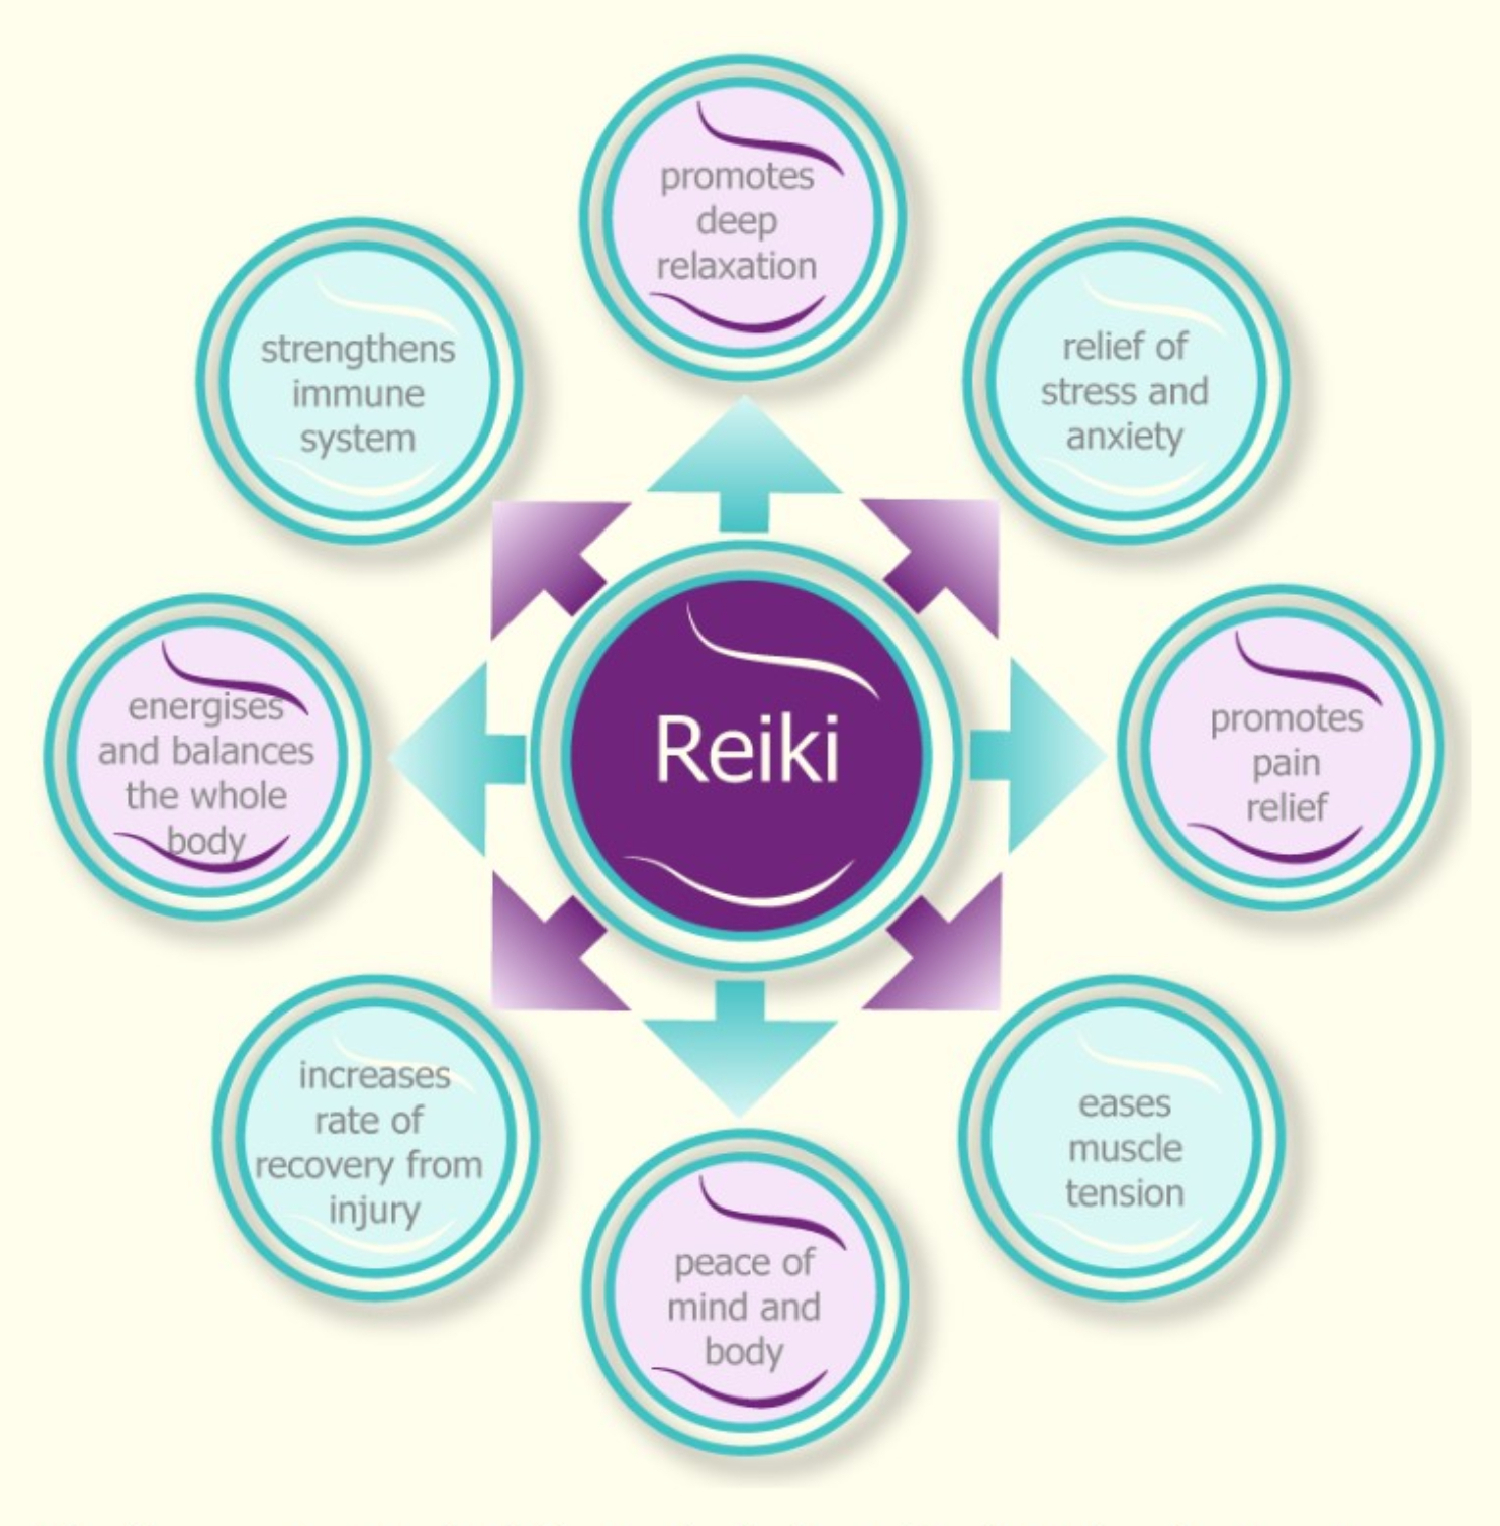 Benefits of a Reiki healing session